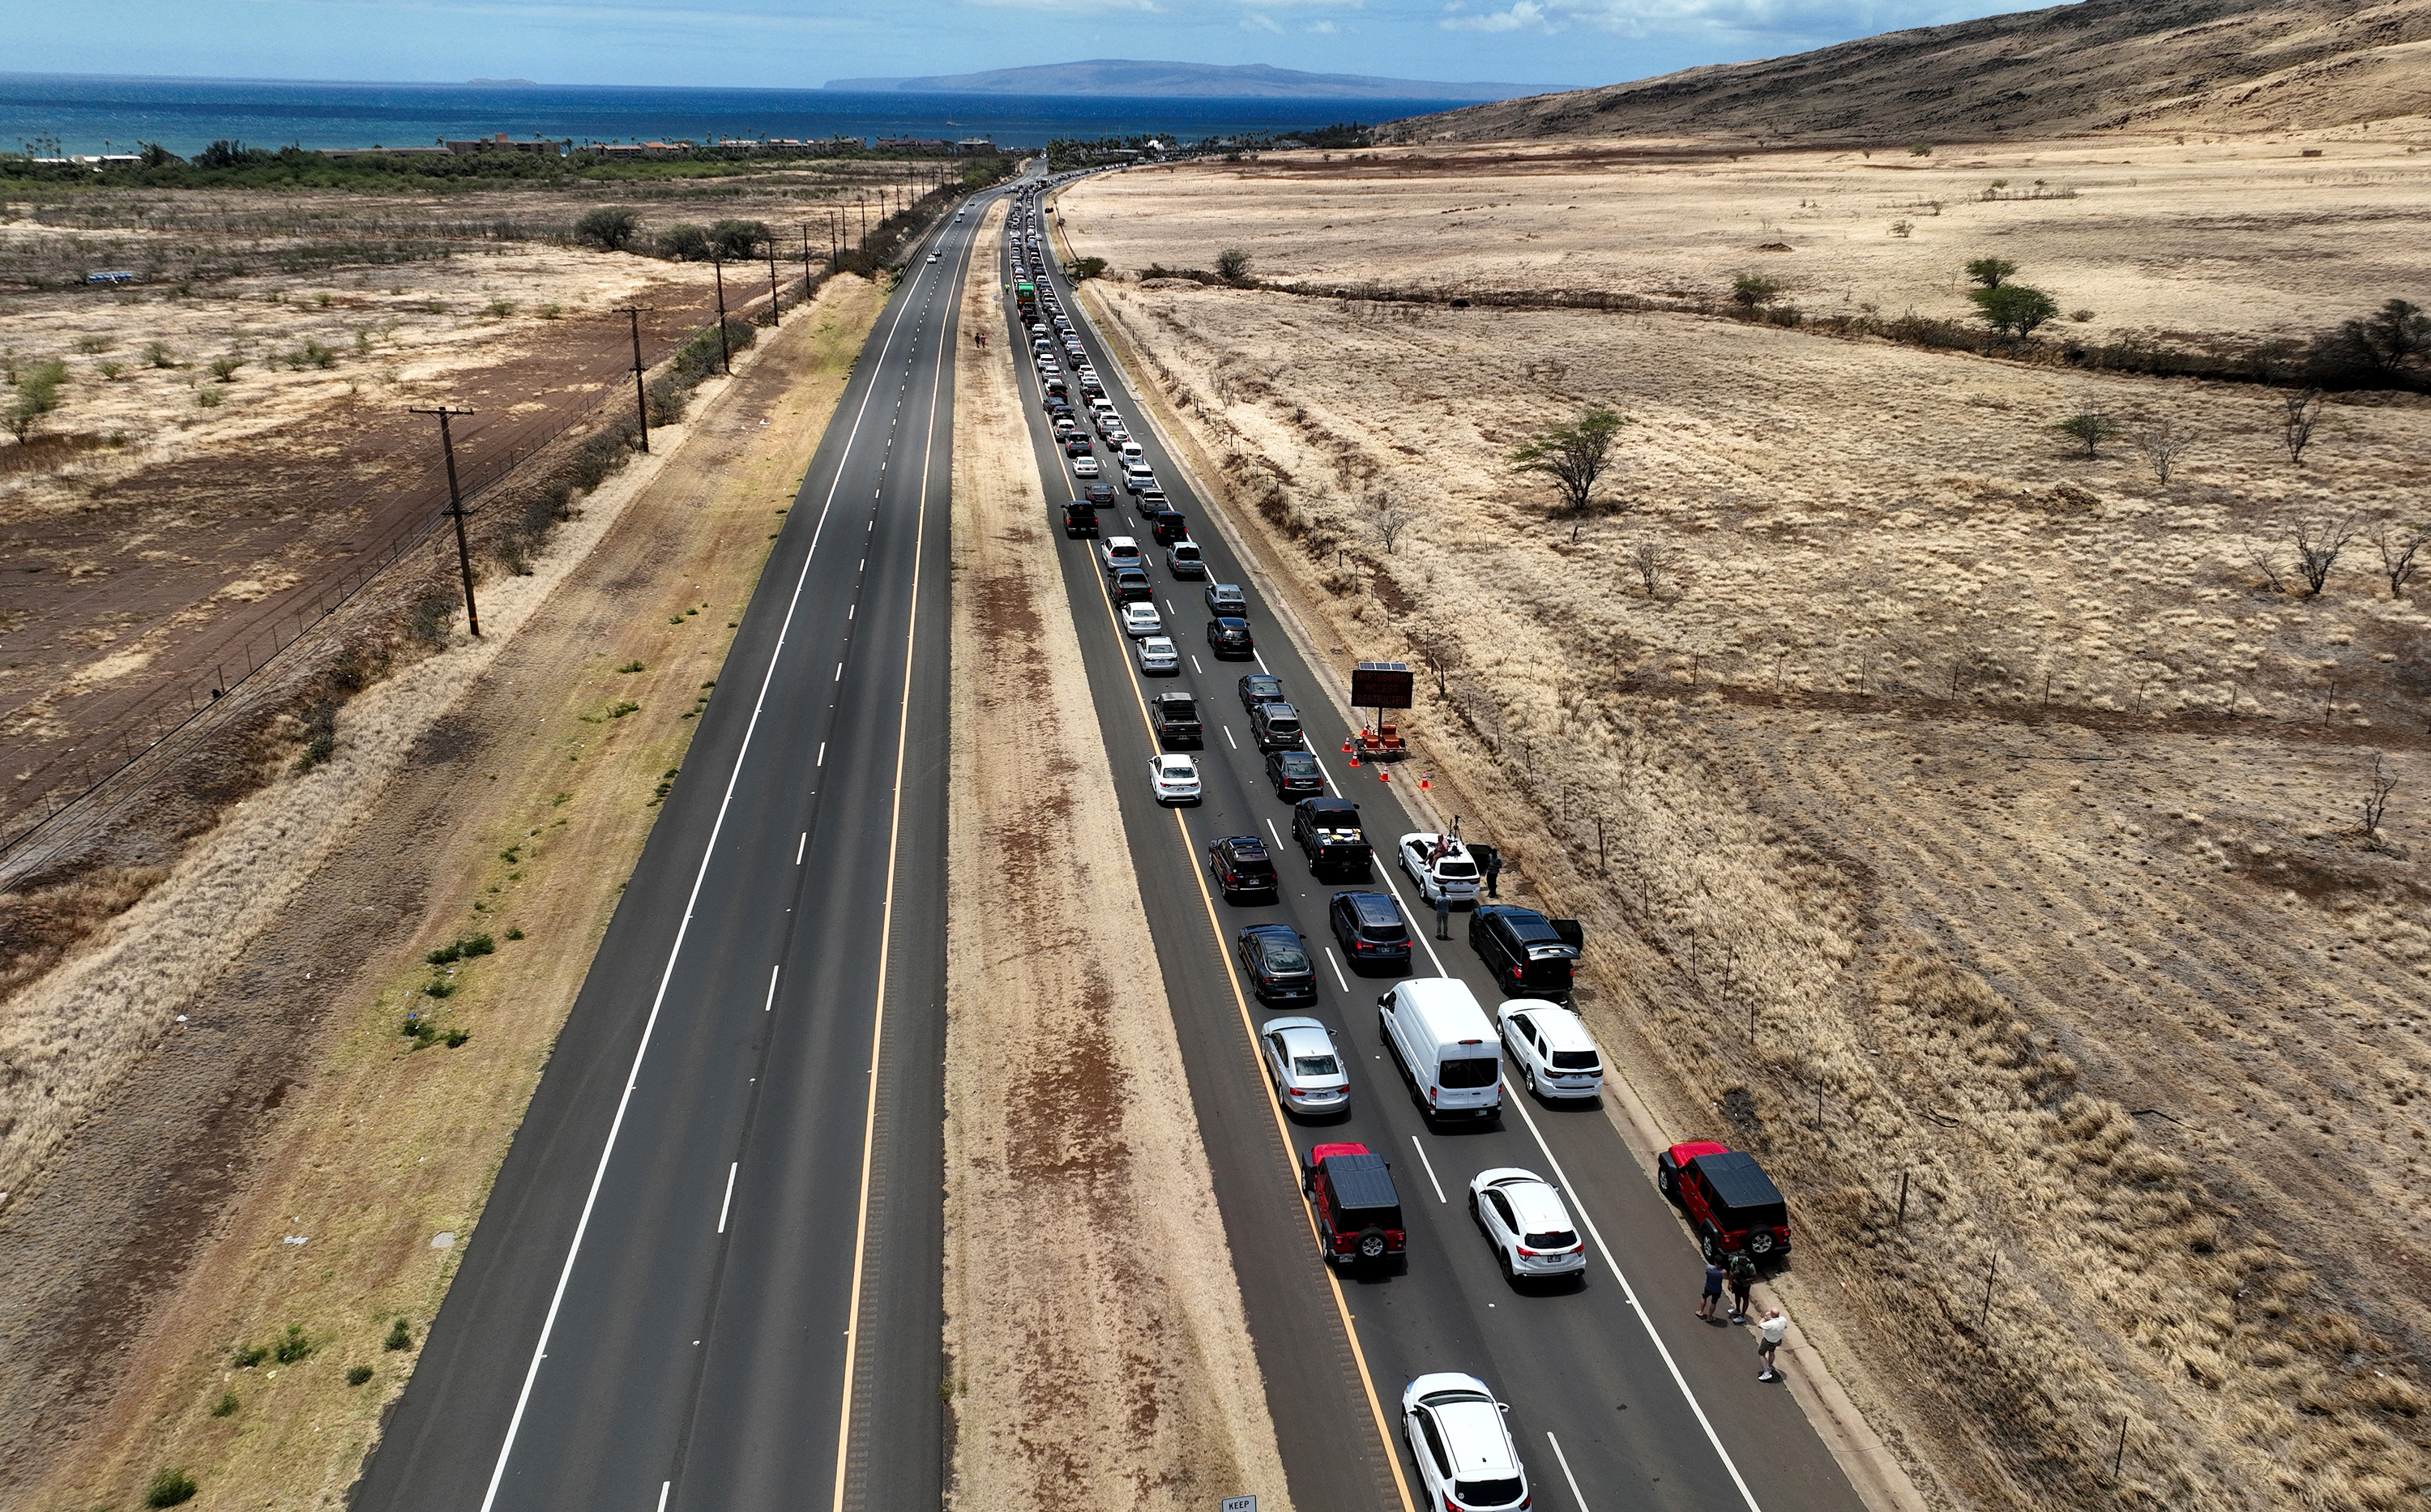 In an aerial view, cars are back up on the Honoapiilani highway as residents are allowed back into areas affected by the recent wildfire in Wailuku, Hawaii on Friday.